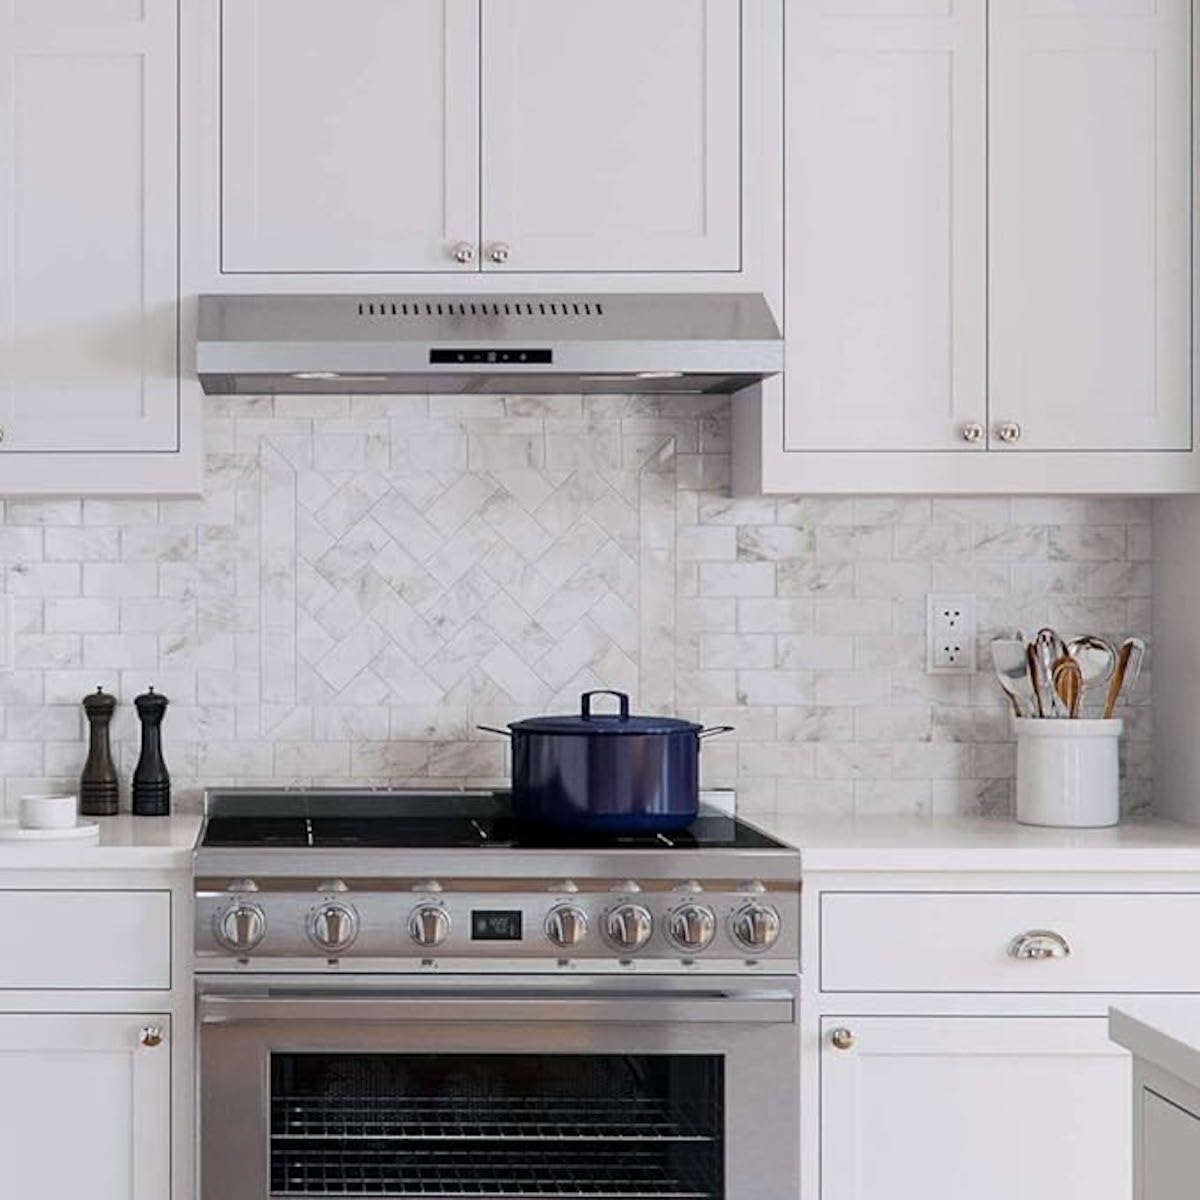 A built-in cabinet range hood in a white kitchen with a blue pot on the stove.